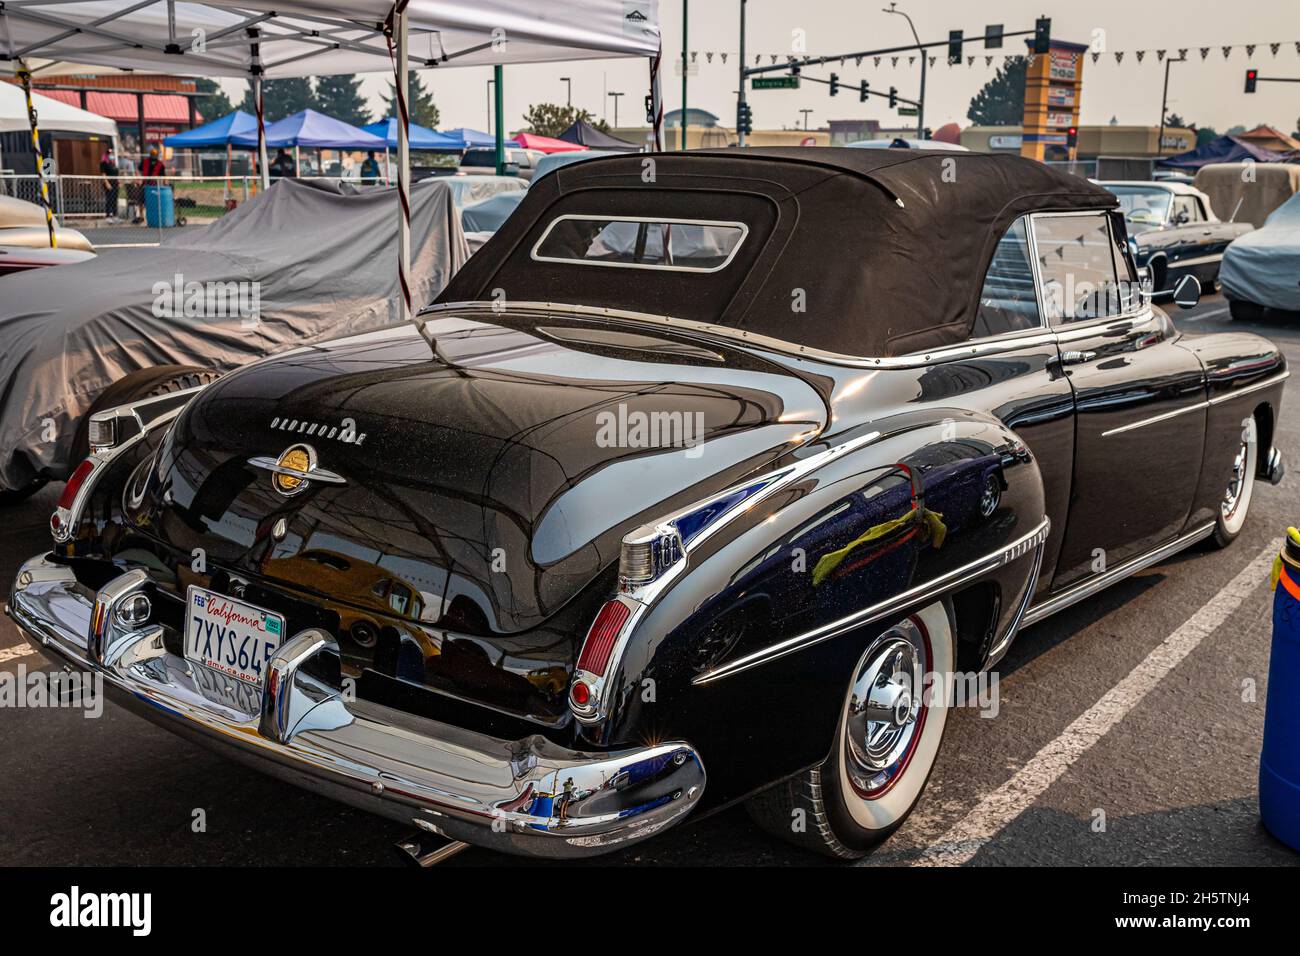 Reno, NV - August 6, 2021: 1950 Oldsmobile Rocket 88 Convertible at a local car show. Stock Photo